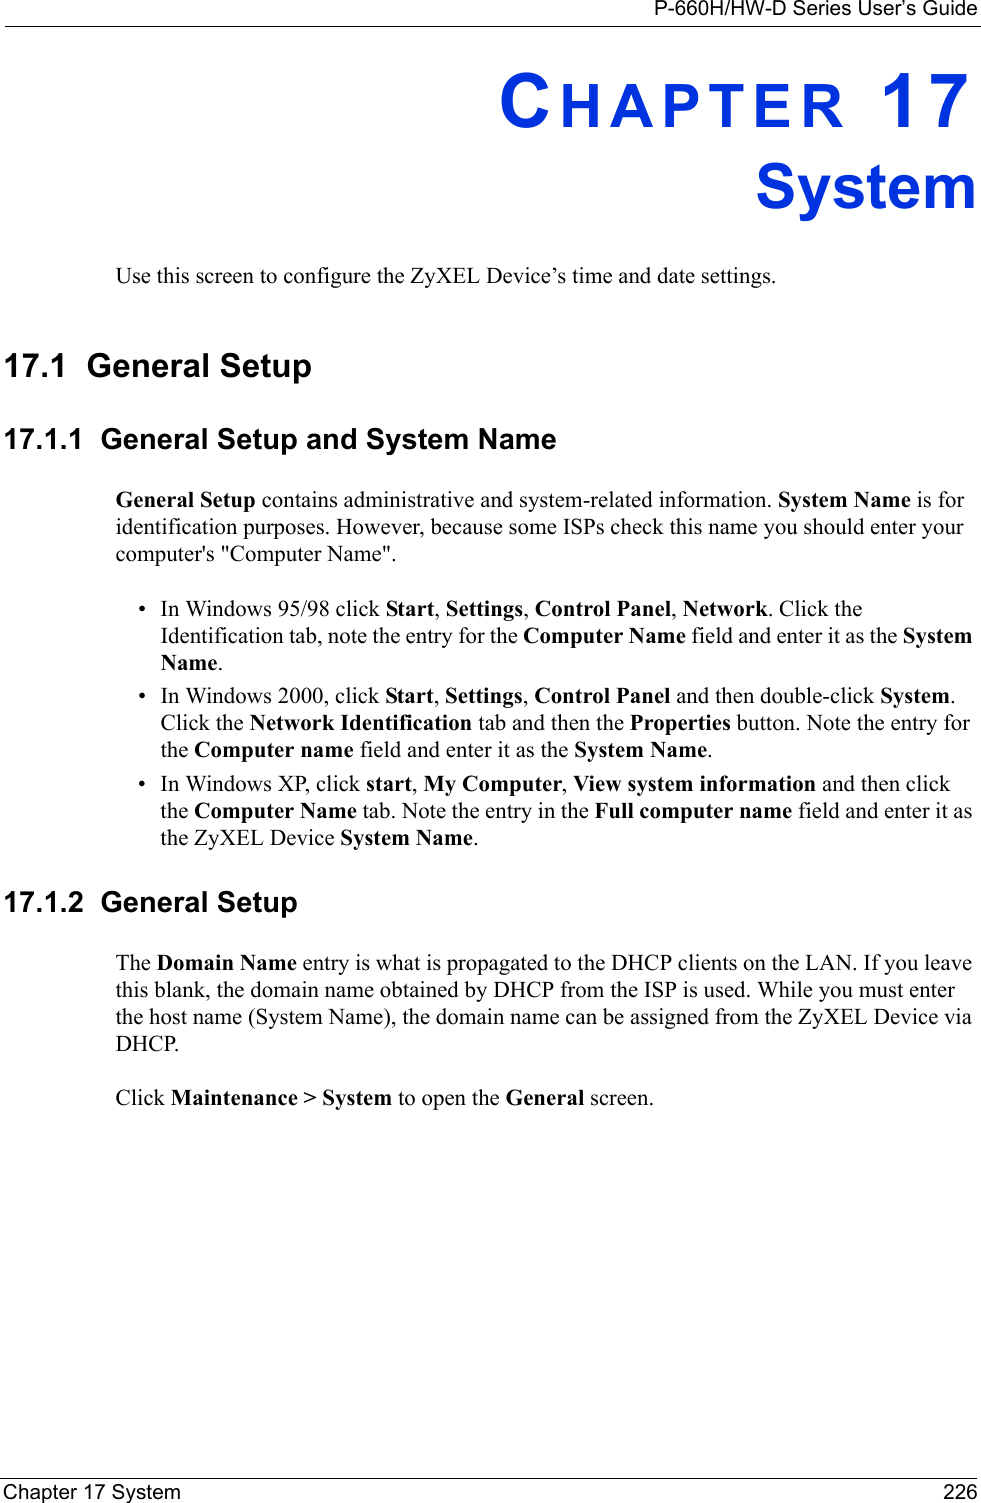 P-660H/HW-D Series User’s GuideChapter 17 System 226CHAPTER 17SystemUse this screen to configure the ZyXEL Device’s time and date settings.17.1  General Setup17.1.1  General Setup and System NameGeneral Setup contains administrative and system-related information. System Name is for identification purposes. However, because some ISPs check this name you should enter your computer&apos;s &quot;Computer Name&quot;. • In Windows 95/98 click Start, Settings, Control Panel, Network. Click the Identification tab, note the entry for the Computer Name field and enter it as the System Name.• In Windows 2000, click Start, Settings, Control Panel and then double-click System. Click the Network Identification tab and then the Properties button. Note the entry for the Computer name field and enter it as the System Name.• In Windows XP, click start, My Computer, View system information and then click the Computer Name tab. Note the entry in the Full computer name field and enter it as the ZyXEL Device System Name.17.1.2  General Setup The Domain Name entry is what is propagated to the DHCP clients on the LAN. If you leave this blank, the domain name obtained by DHCP from the ISP is used. While you must enter the host name (System Name), the domain name can be assigned from the ZyXEL Device via DHCP.Click Maintenance &gt; System to open the General screen. 